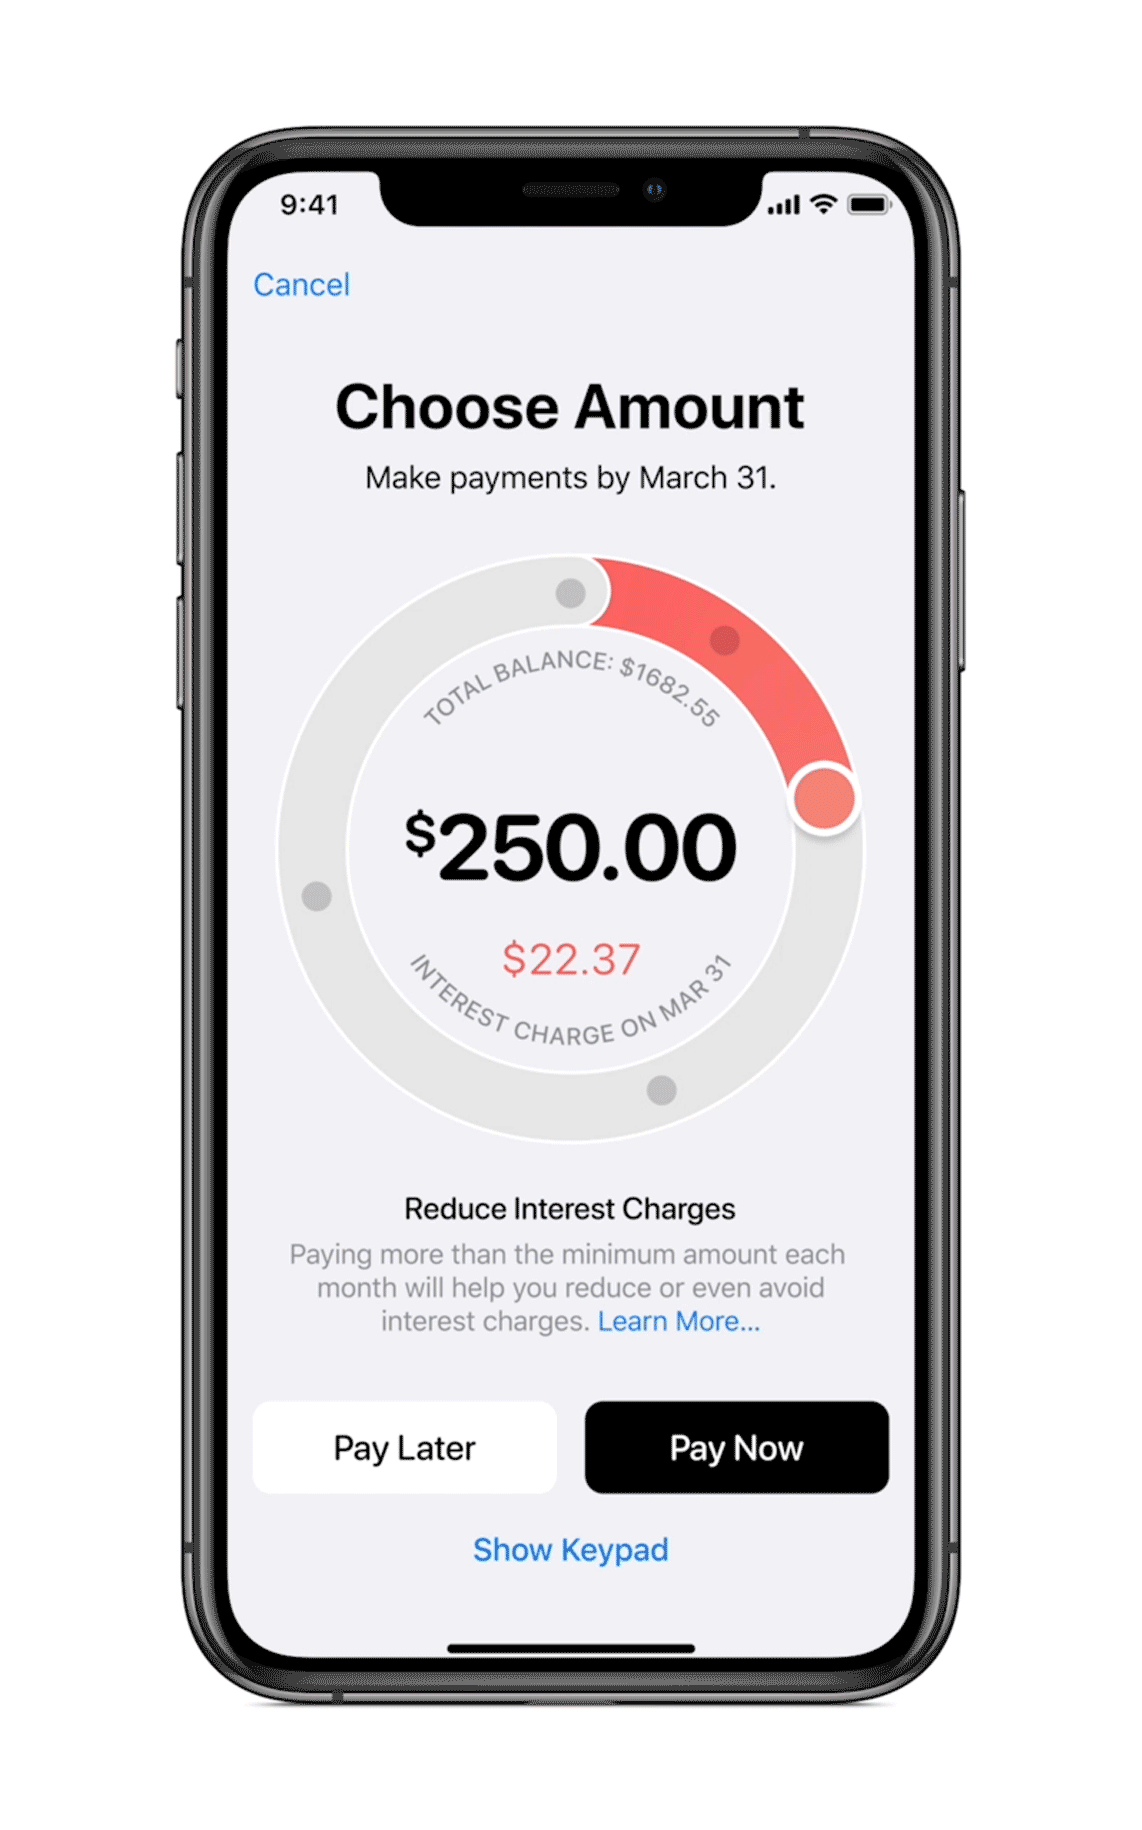 Apple-Card-choose-payment-amount-screen-03252019